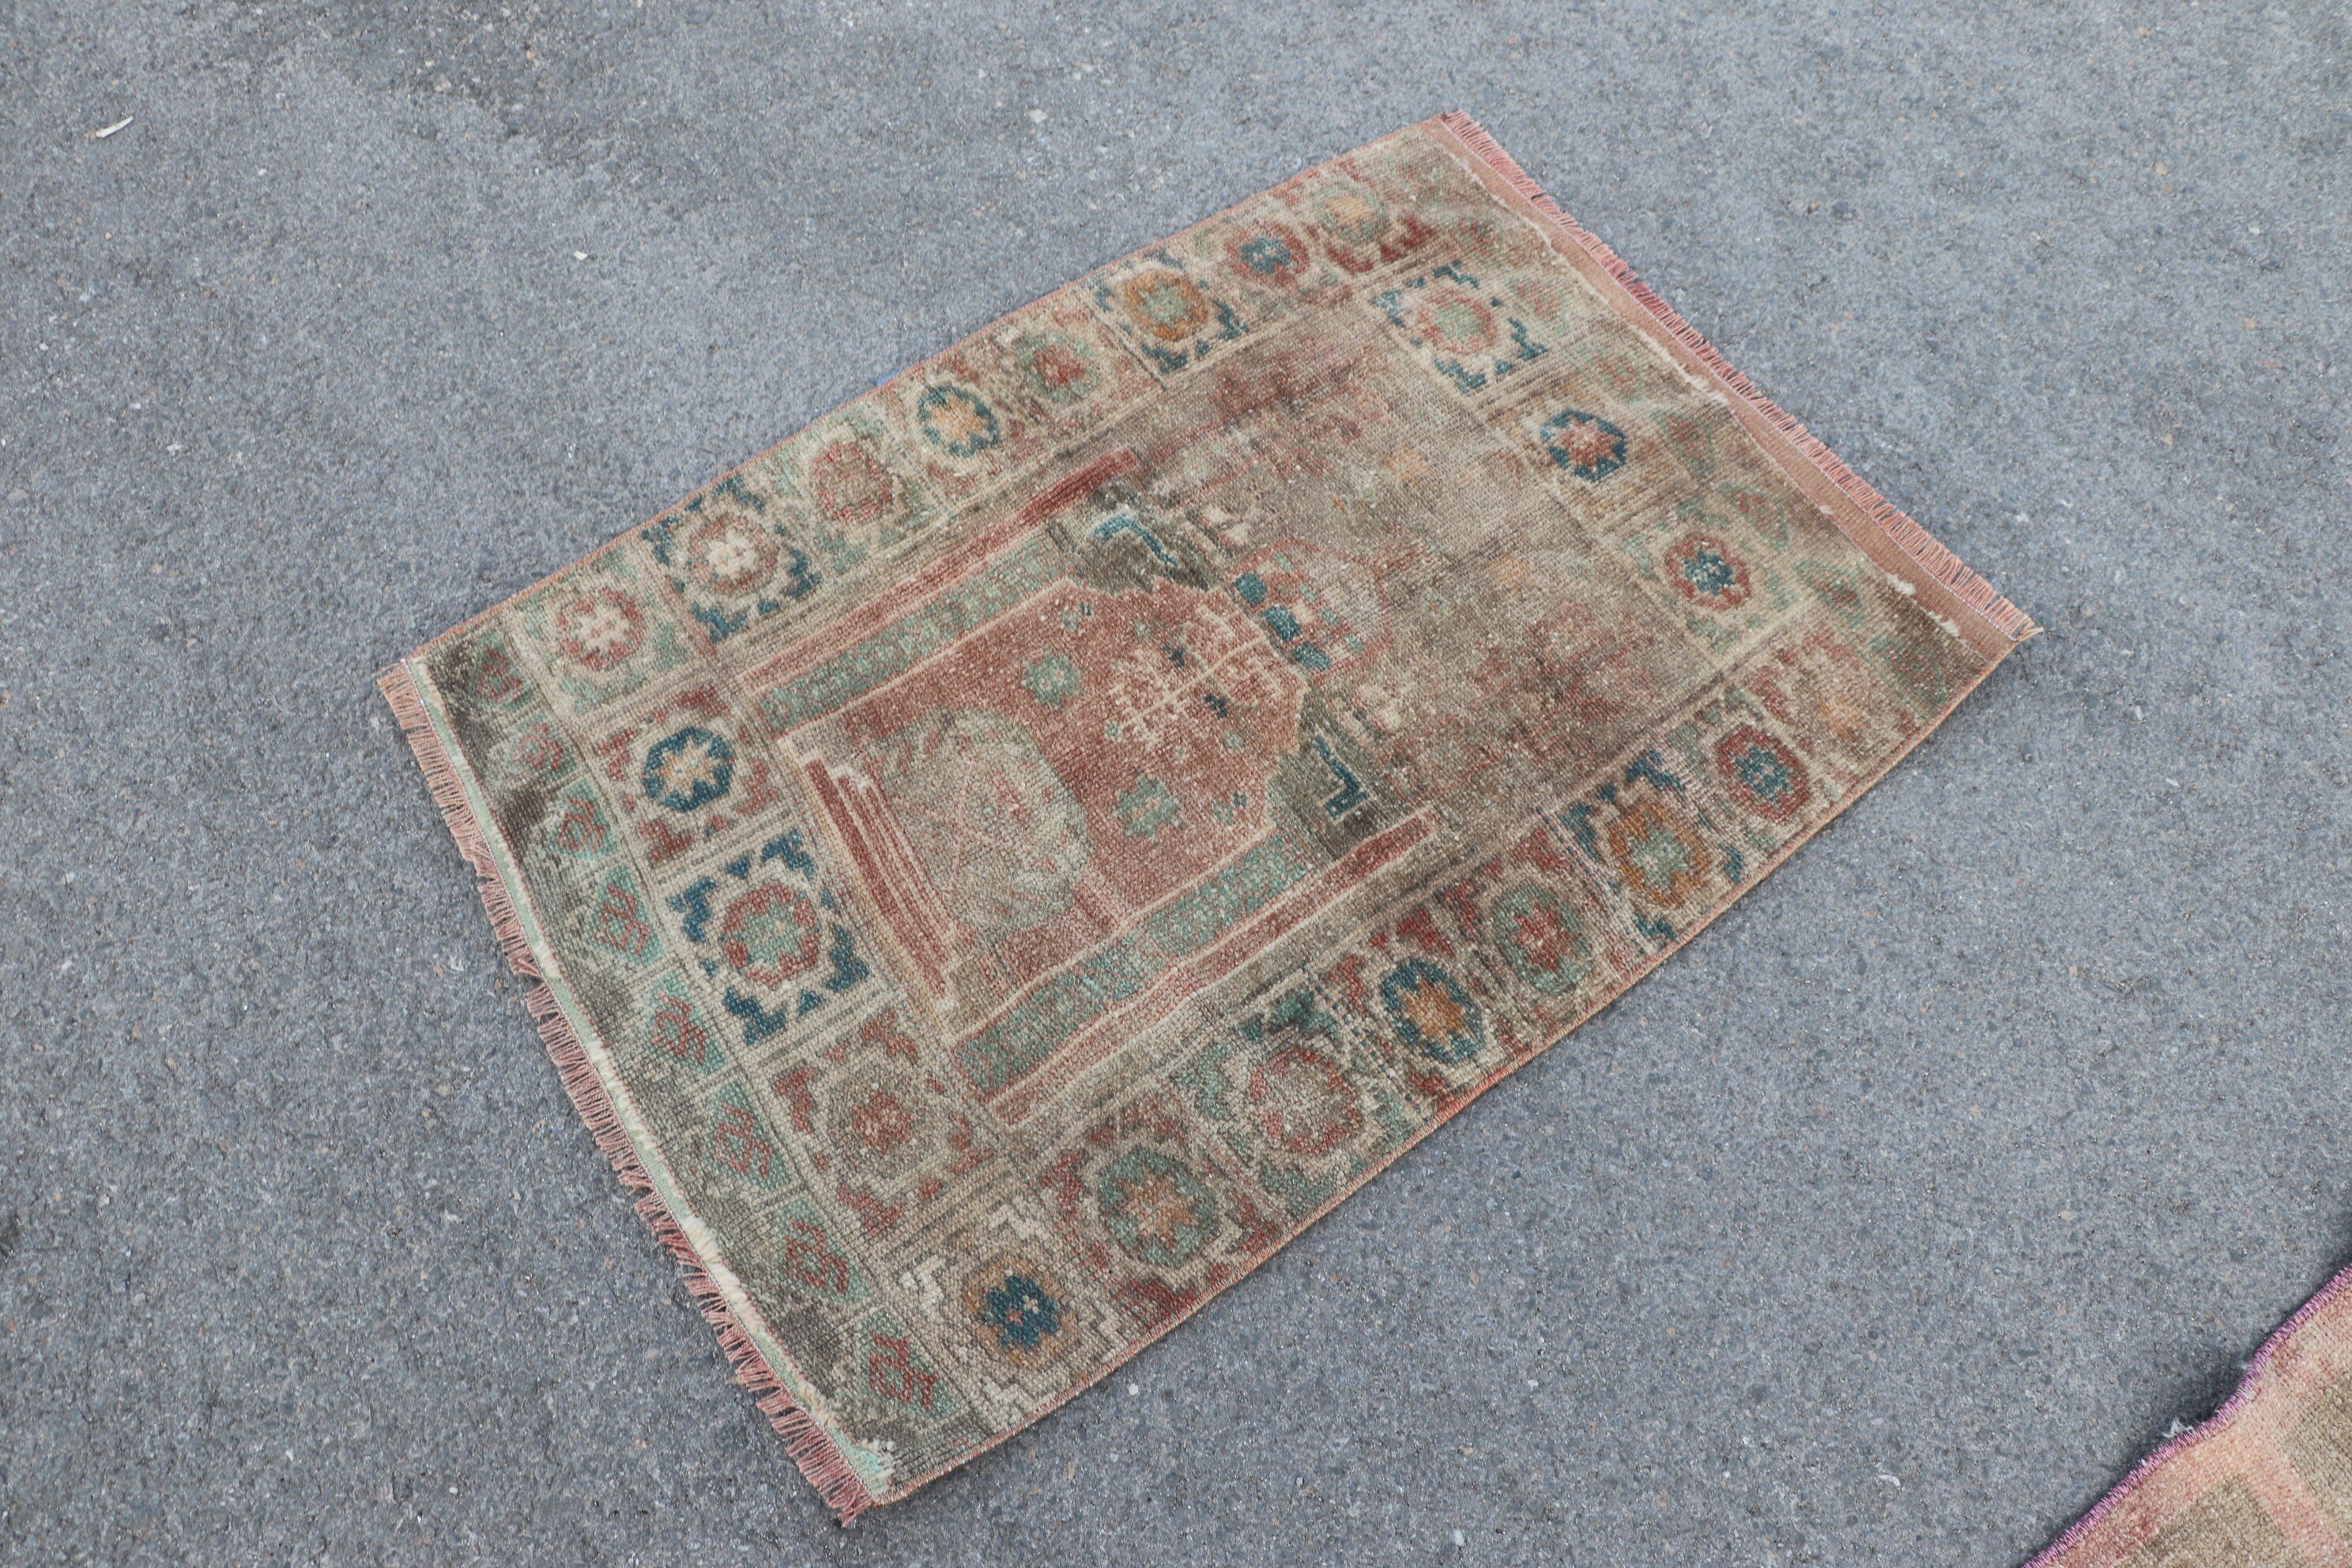 Bath Rug, Rugs for Bath, Turkish Rugs, Red  2.4x3.4 ft Small Rugs, Oriental Rugs, Vintage Rug, Moroccan Rug, Kitchen Rugs